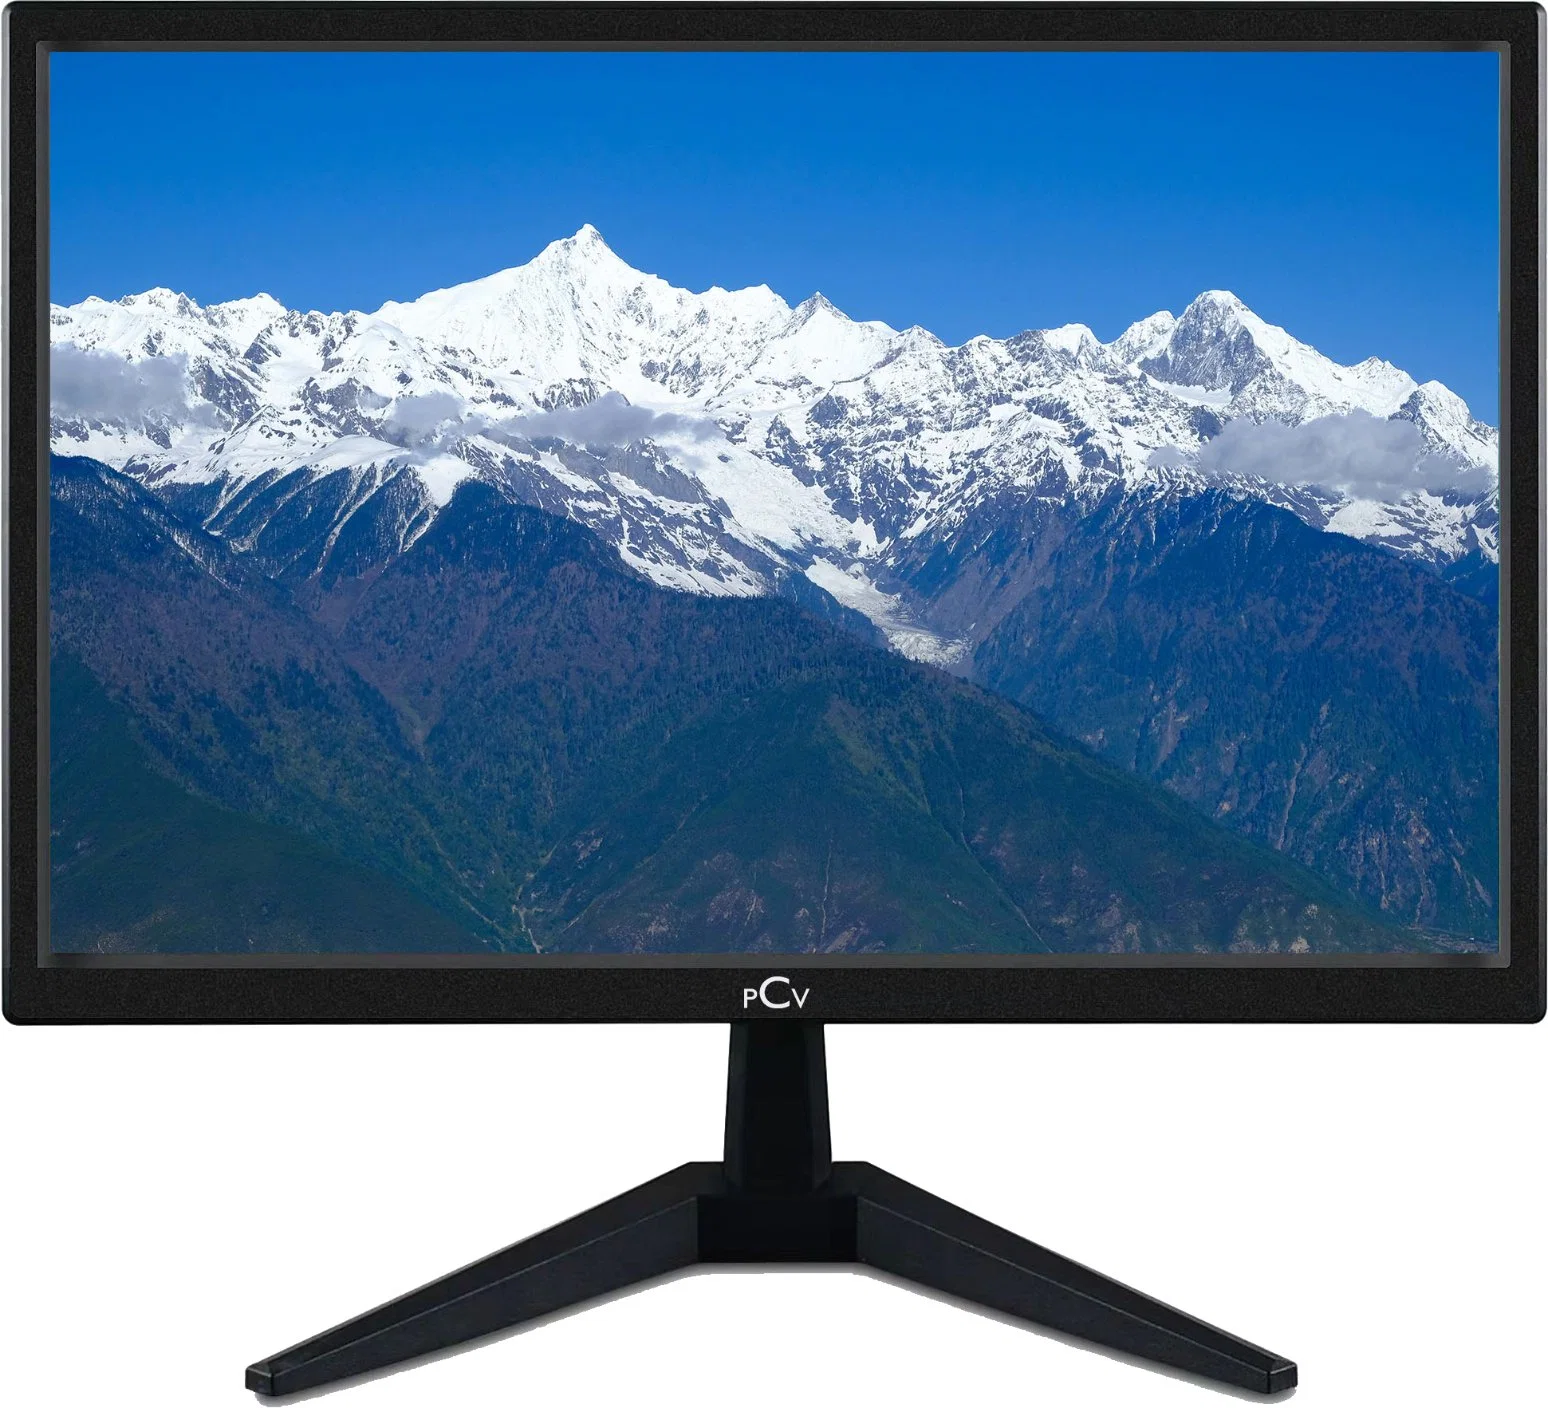 15/17/18.5/19/21.5/22/23/23.6/24/27inch Monitor Desktop Computer LED Monitor for Business & Study & Office Monitor